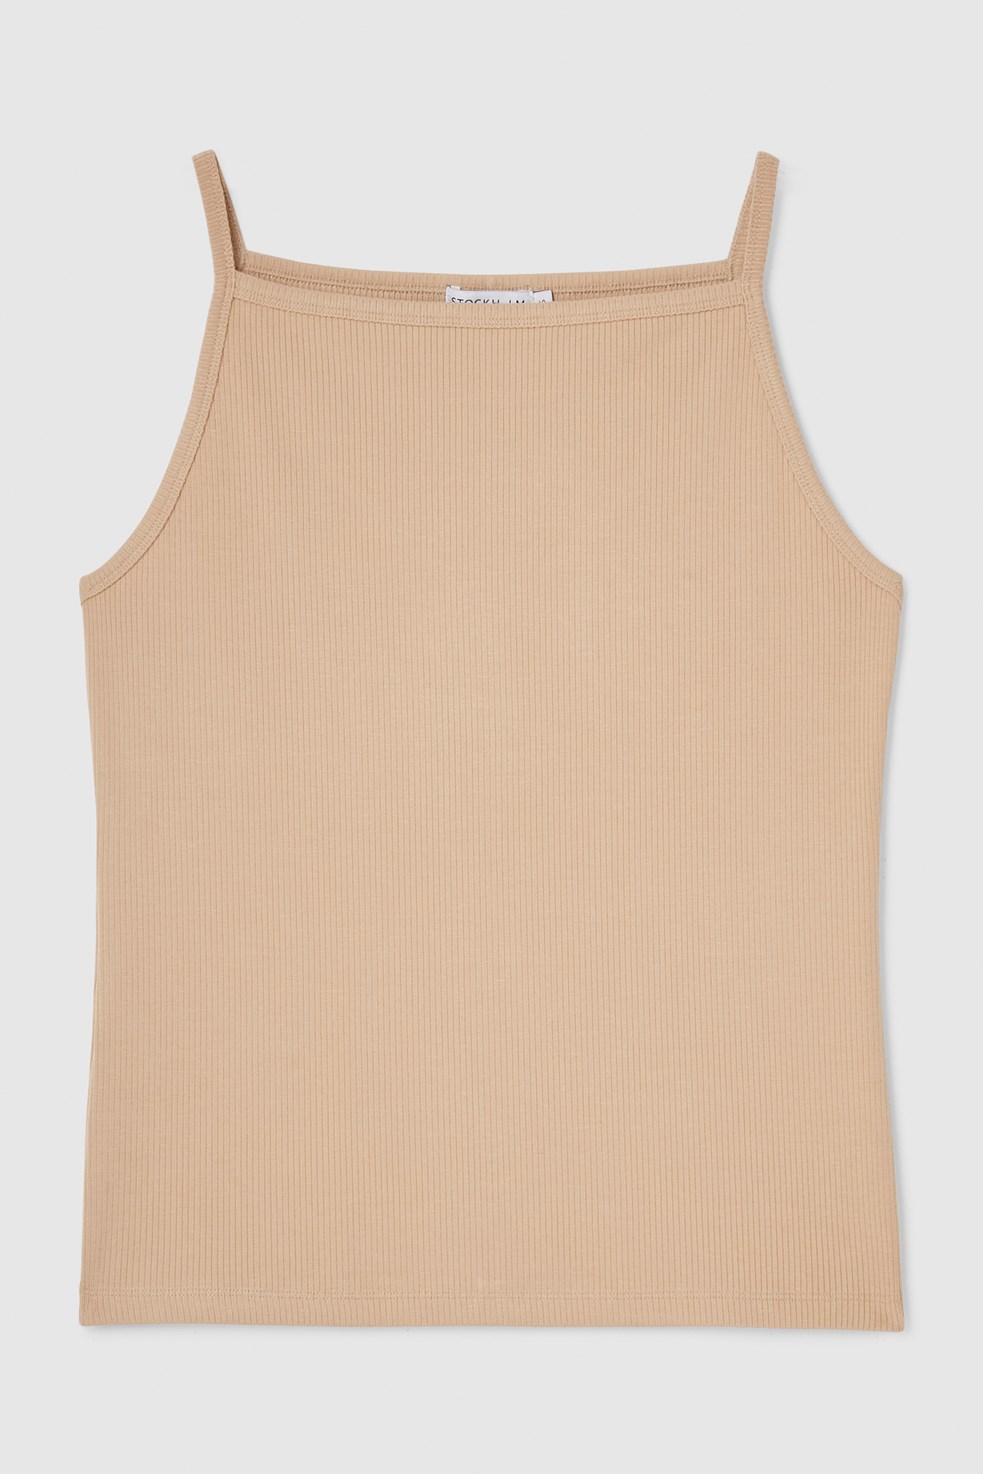 marqetstores.se | Nellie tank top